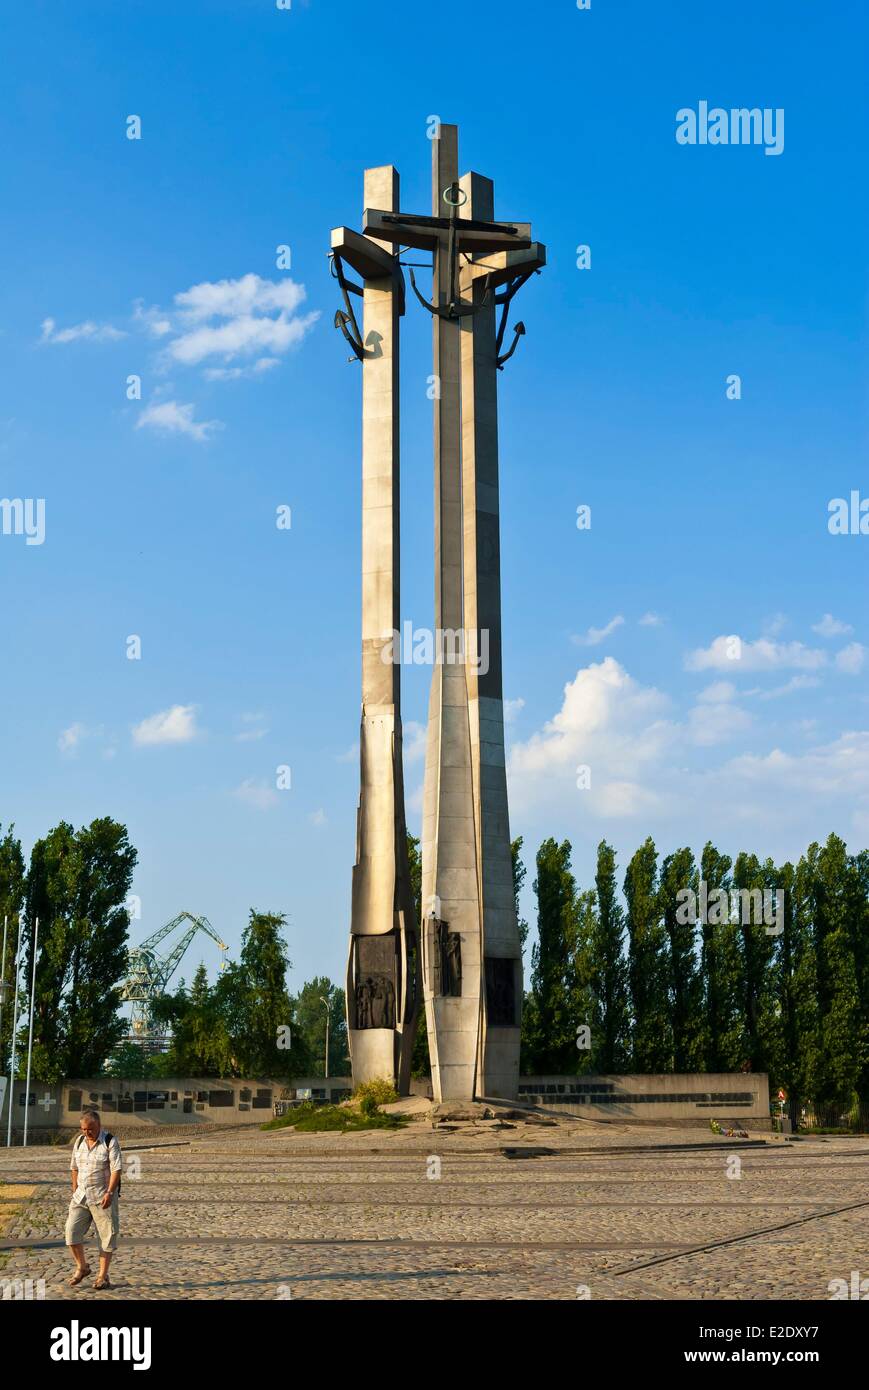 Poland Eastern Pomerania Gdansk monument to the fallen shipyard workers composed of three majestic crosses with anchors symbols Stock Photo